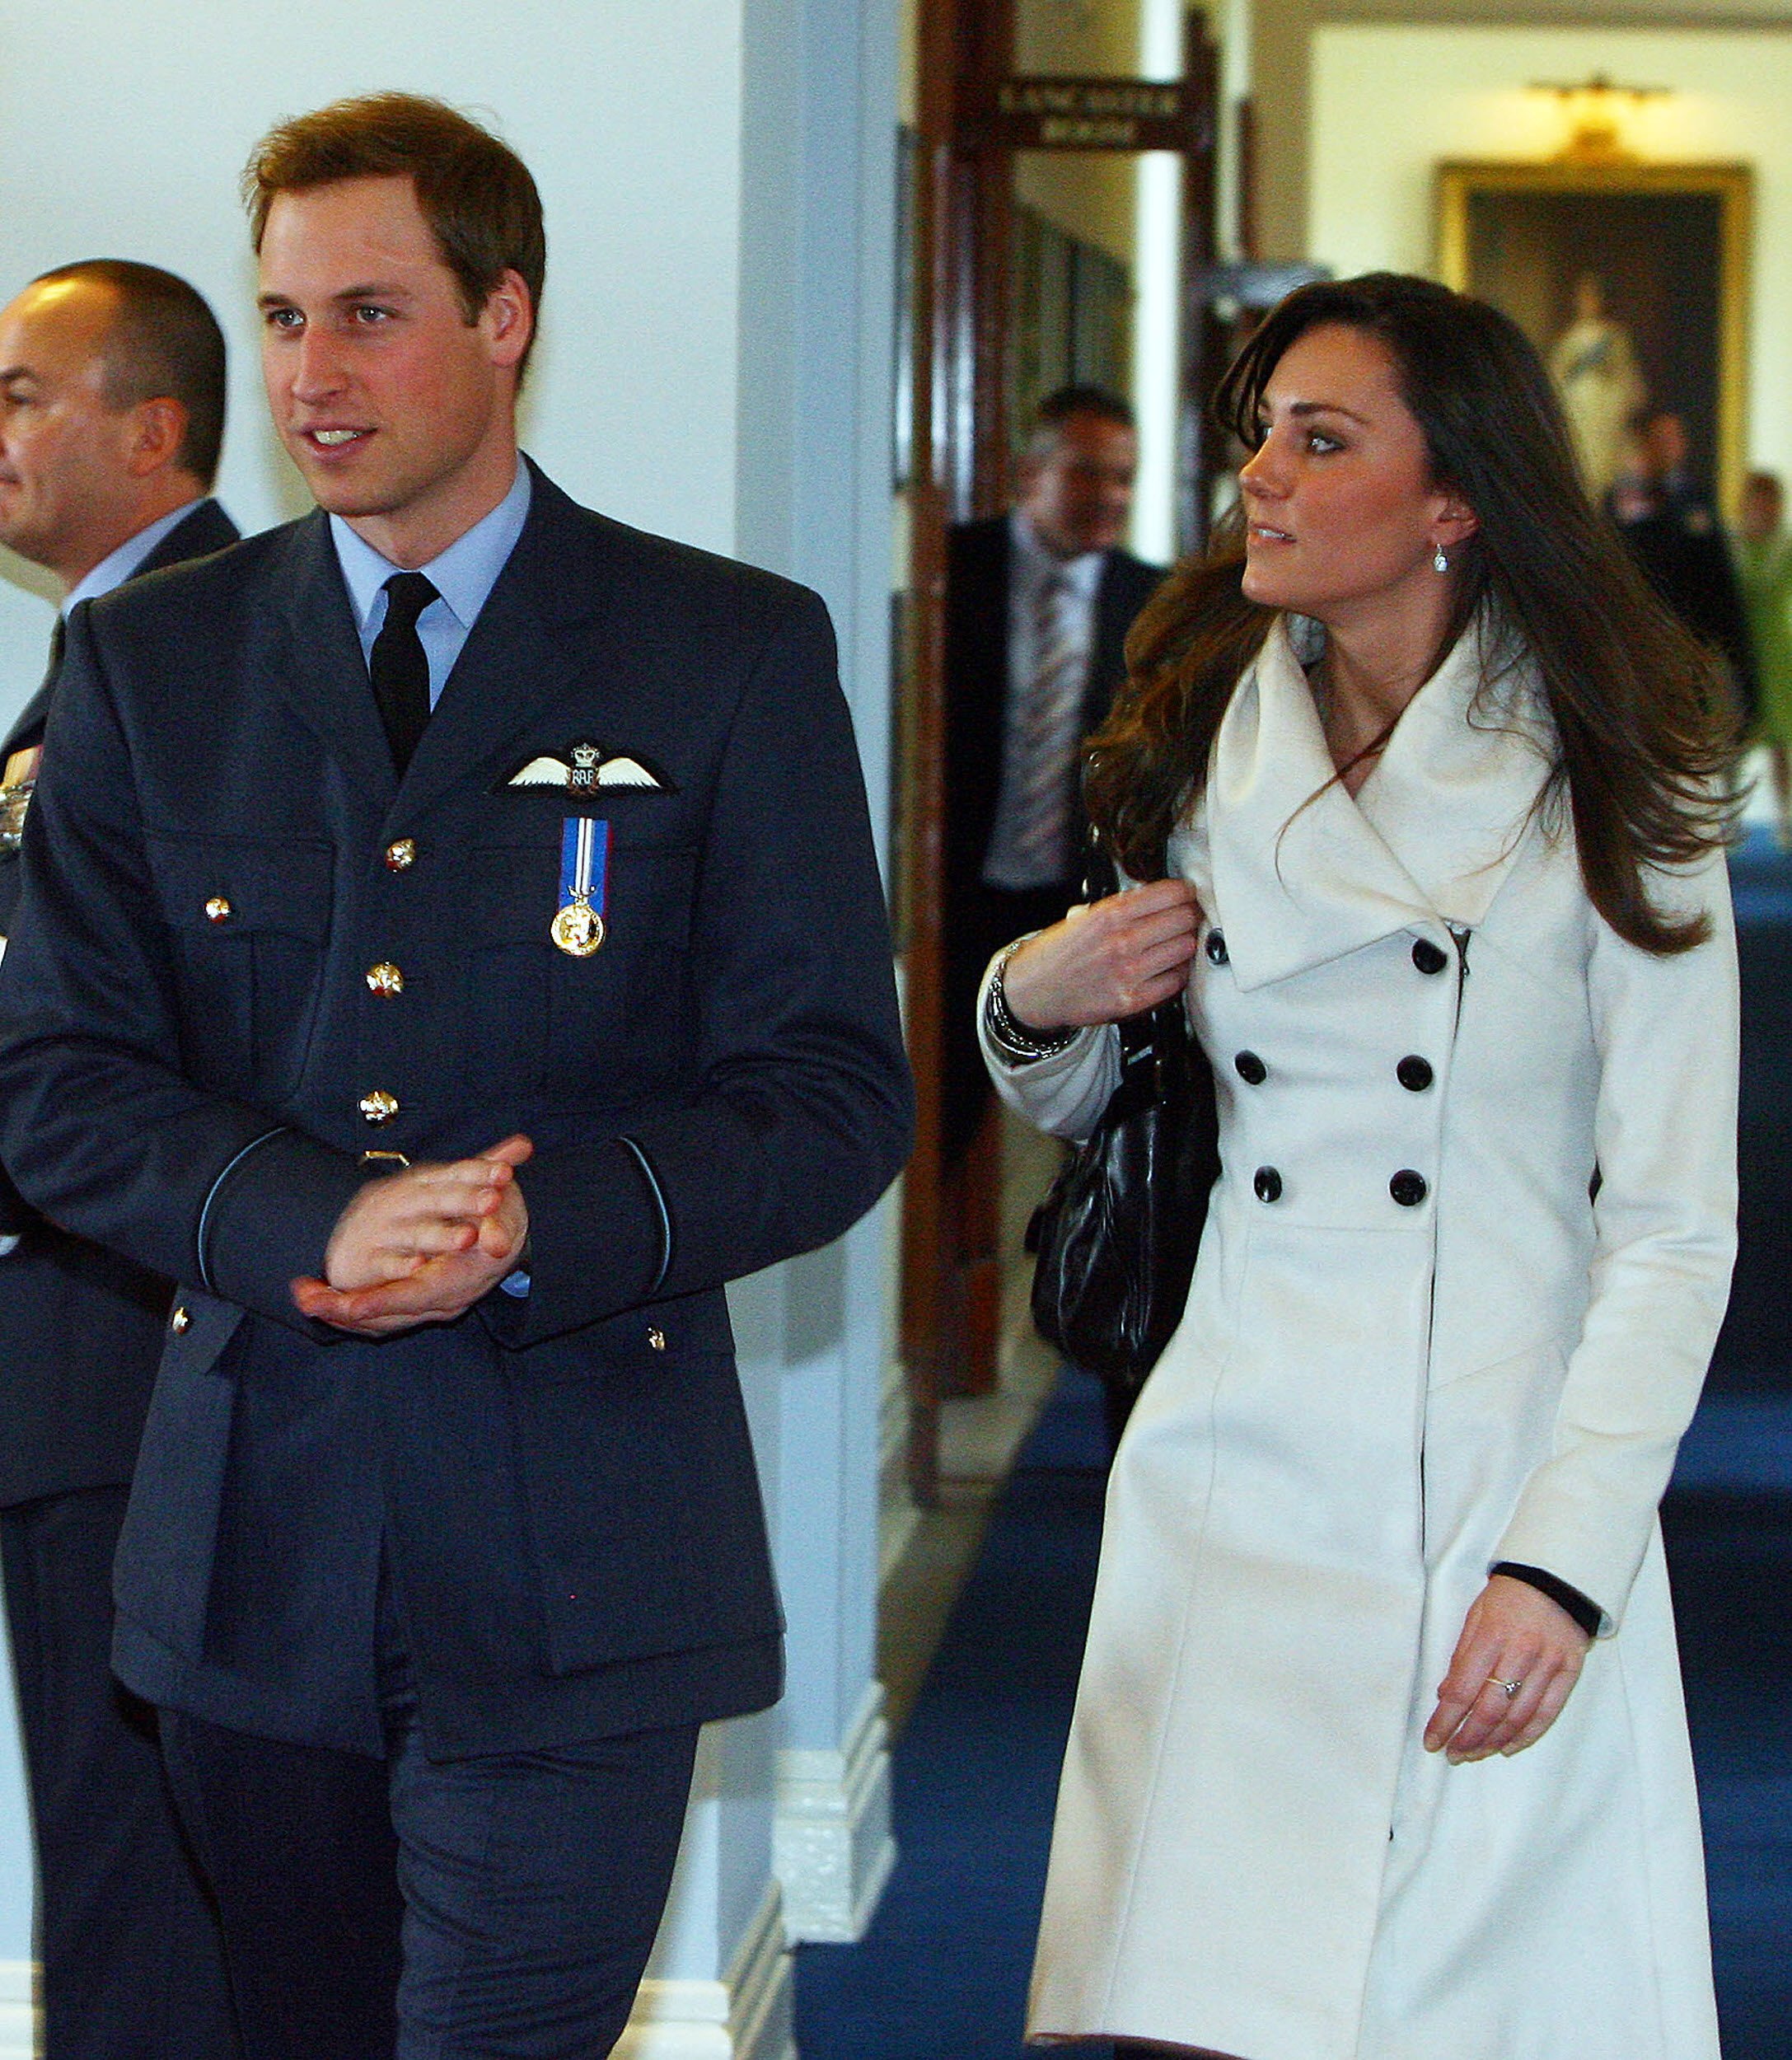 Prince William and Kate Middleton at his graduation ceremony at RAF Cranwell on April 11, 2008 | Source: Getty Images